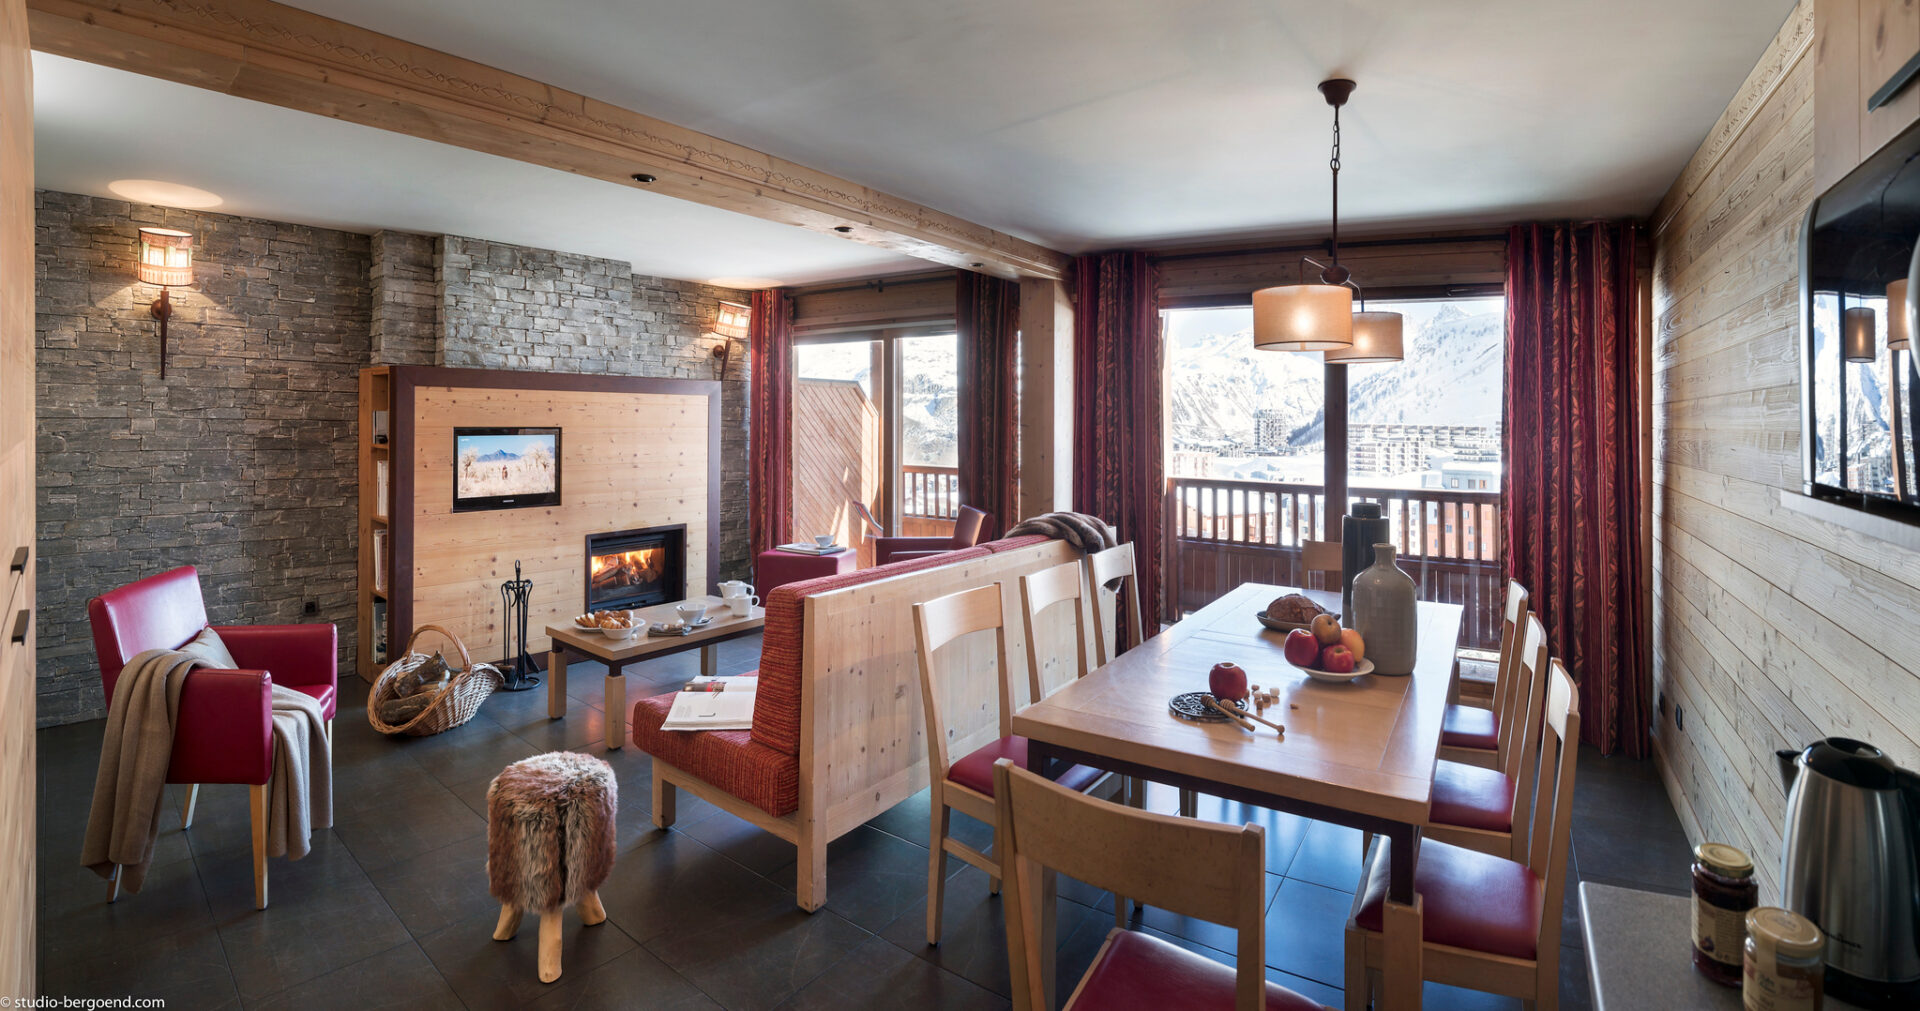 An image of one of the apartments at Village Montana Tignes